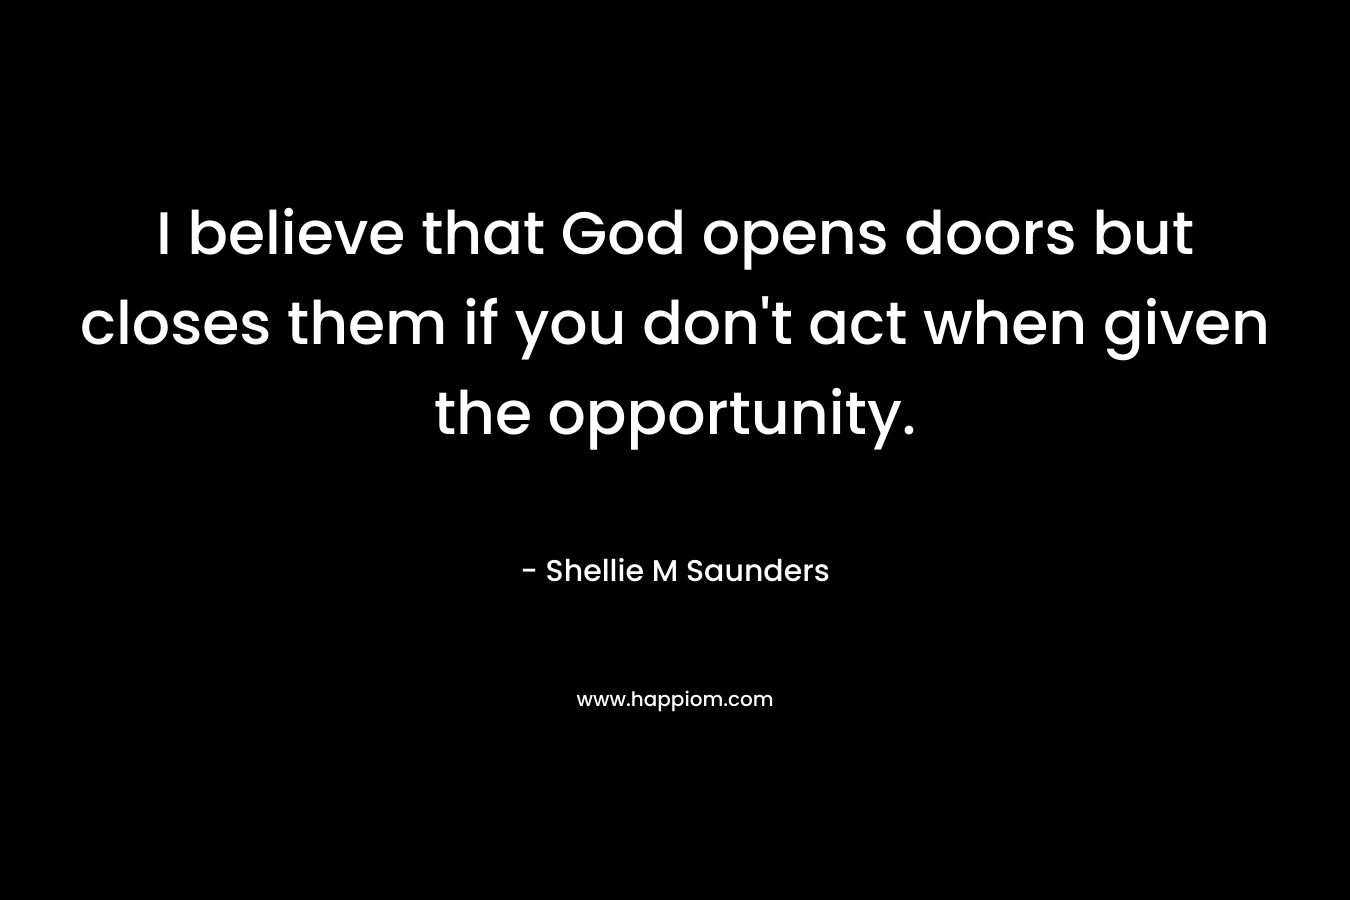 I believe that God opens doors but closes them if you don’t act when given the opportunity. – Shellie M Saunders